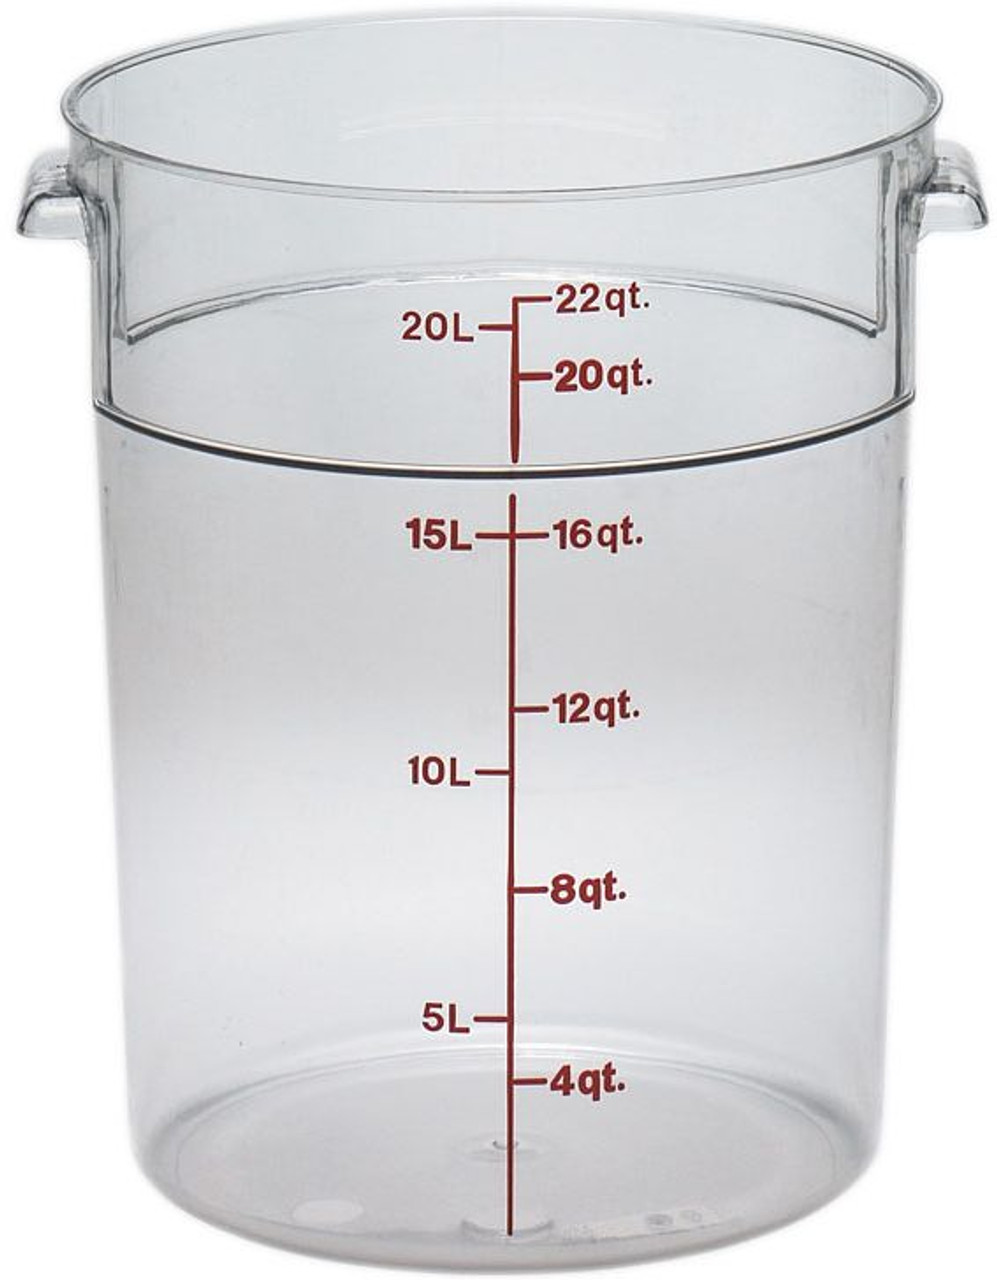 Cambro RFSCW22135 22 Quart Round Polycarbonate Food Storage Container